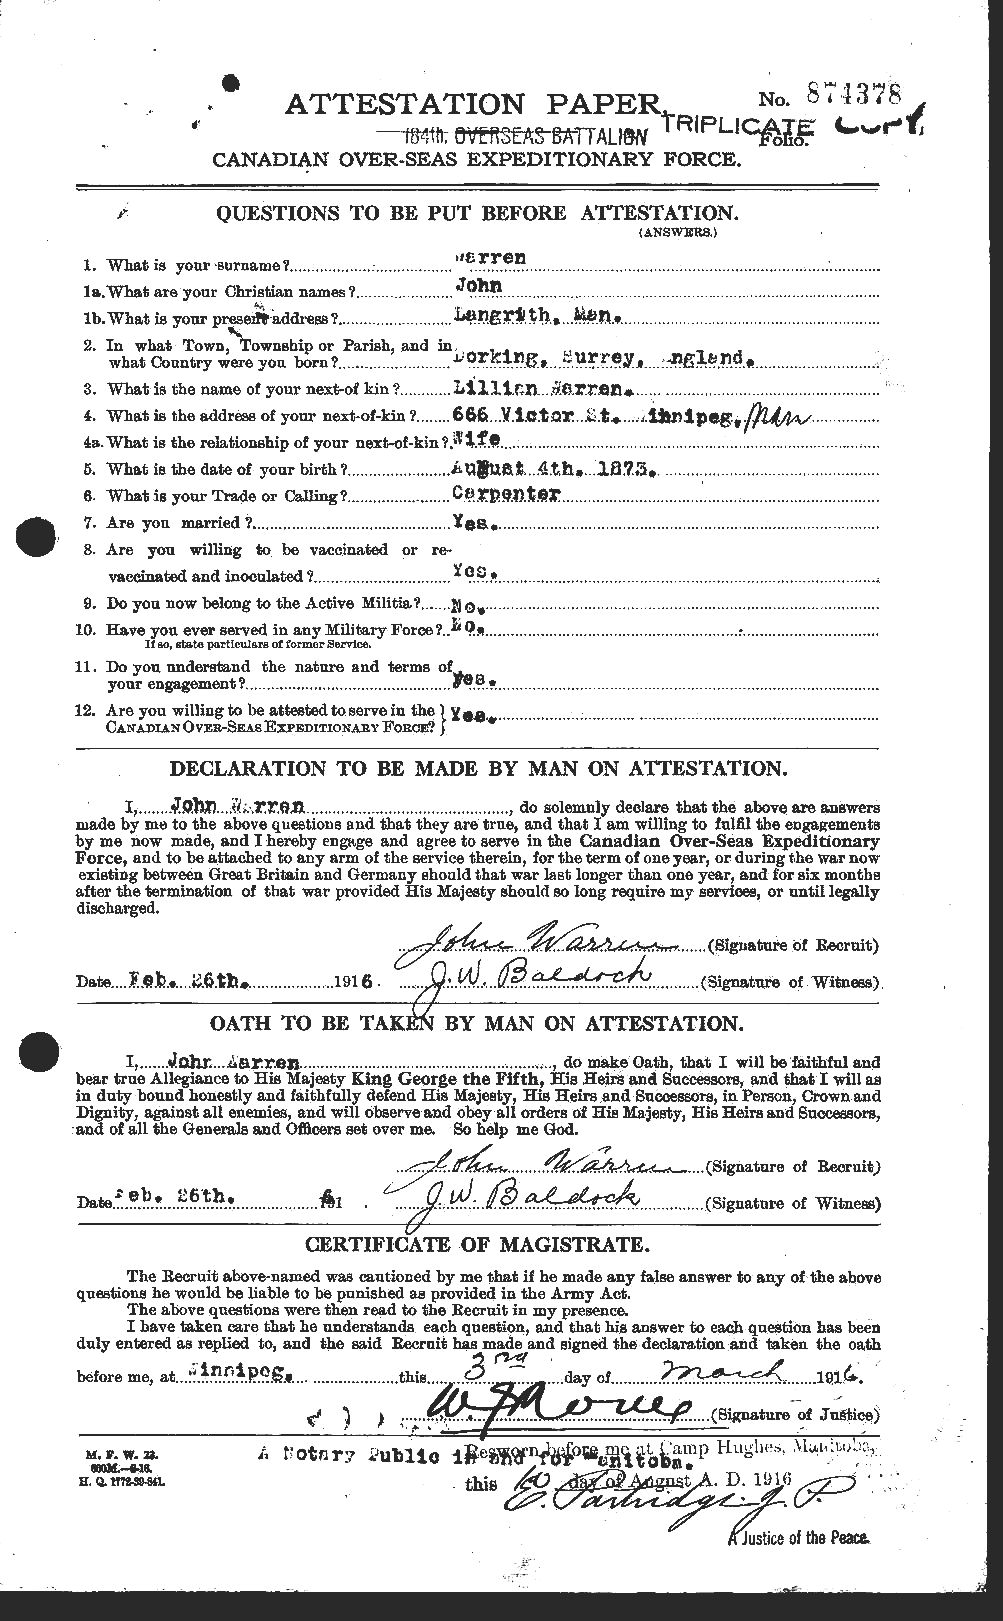 Personnel Records of the First World War - CEF 658534a